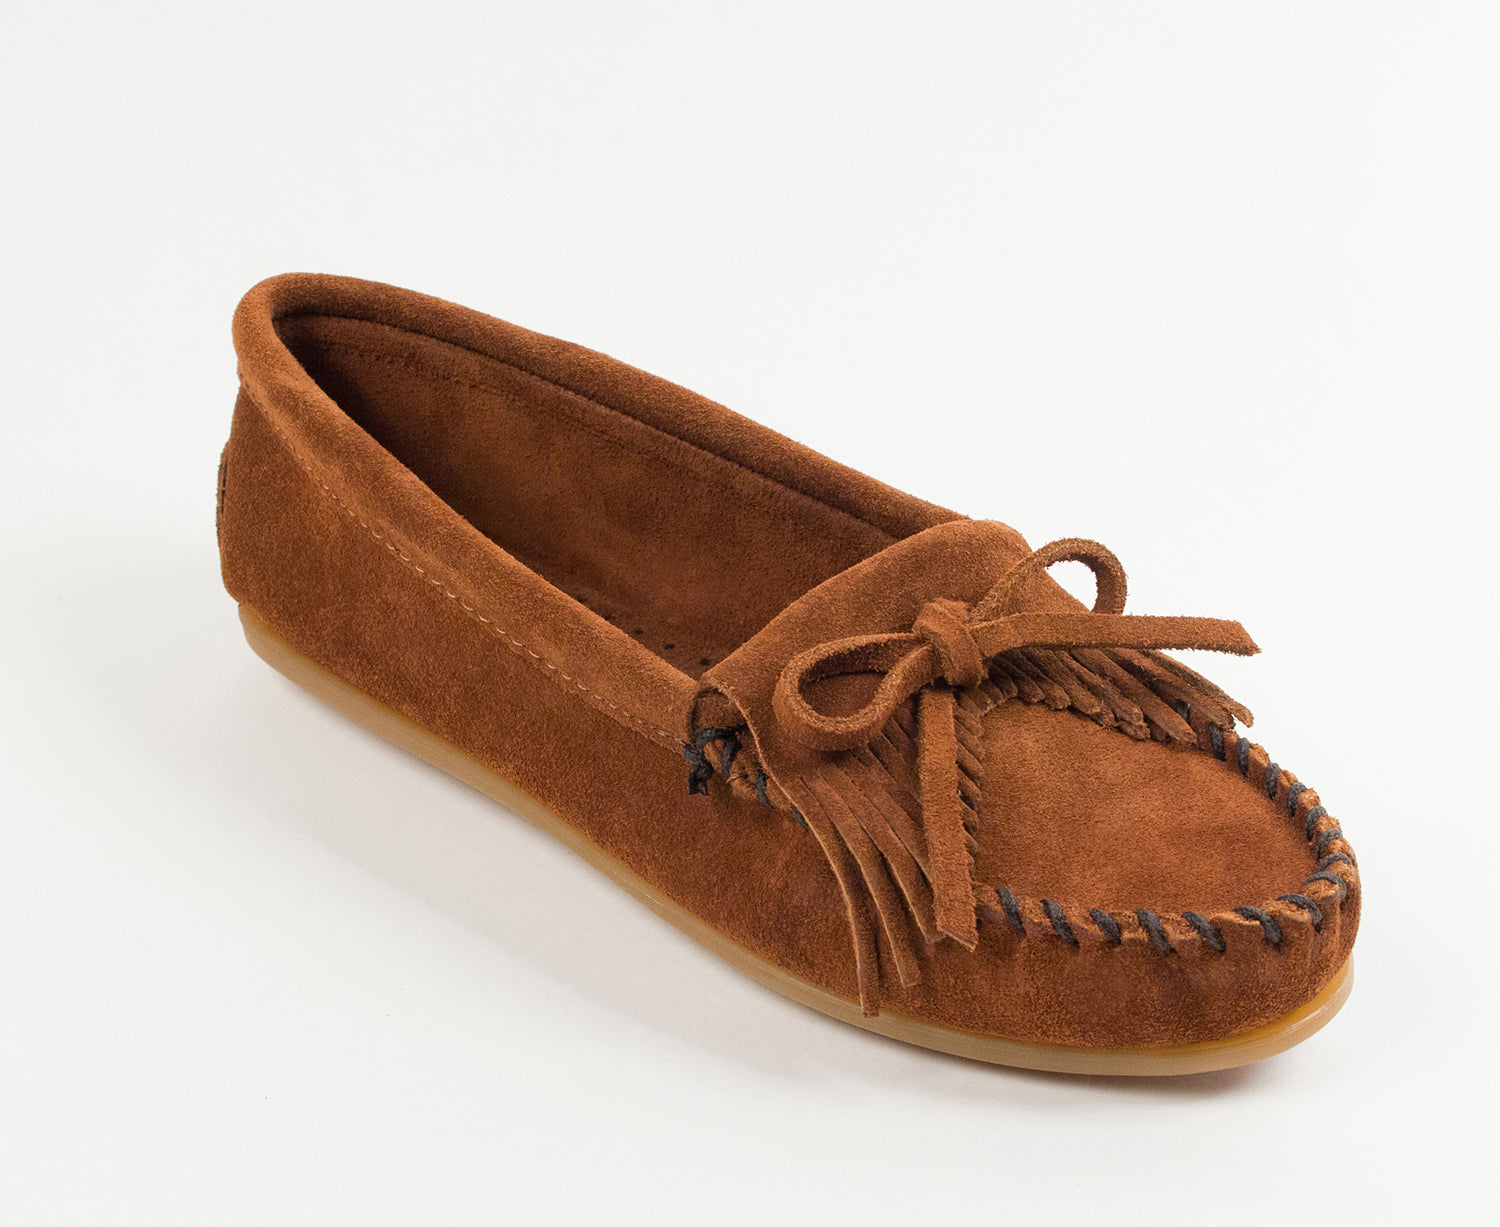 Kilty Hardsole Moccasin in Brown from 3/4 Angle View